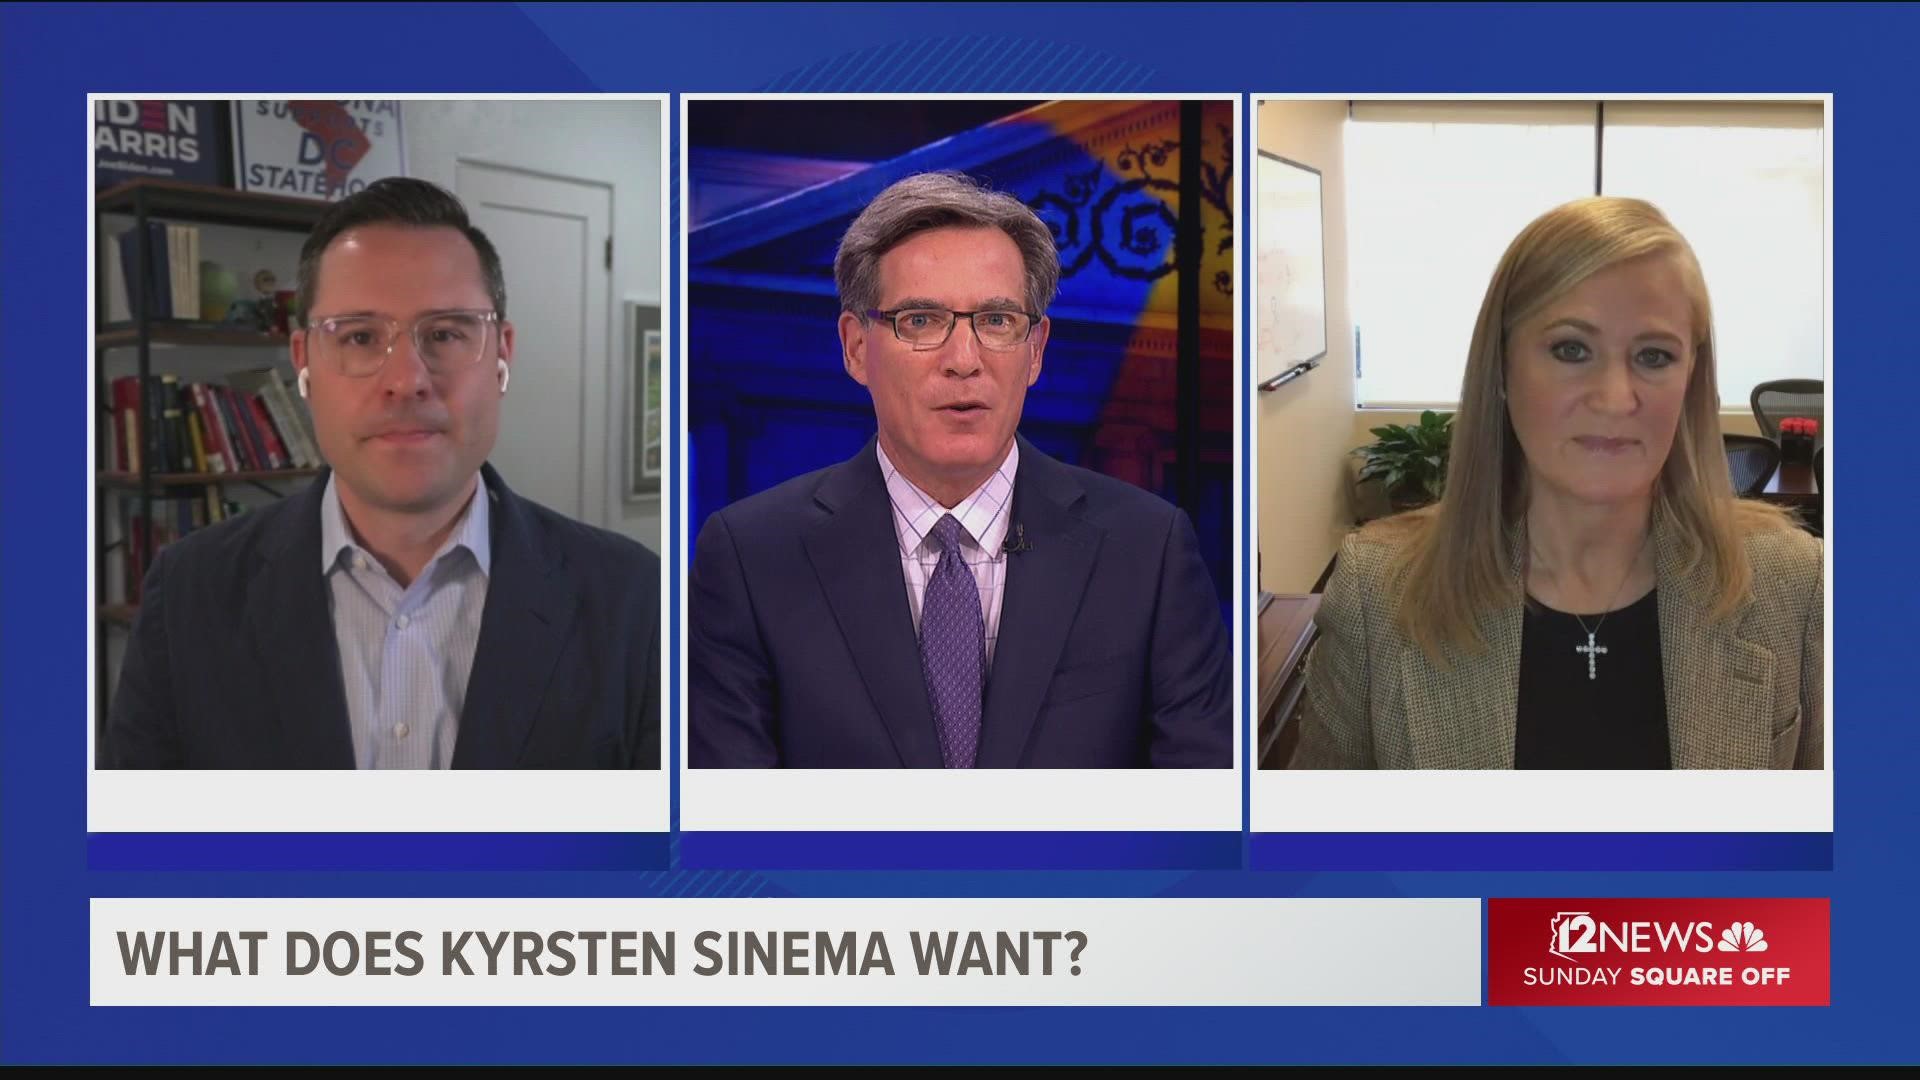 Our ‘Sunday Square Off’ political insiders explain Sen. Kyrsten Sinema's role in the standoff over infrastructure bills in the House and Senate.